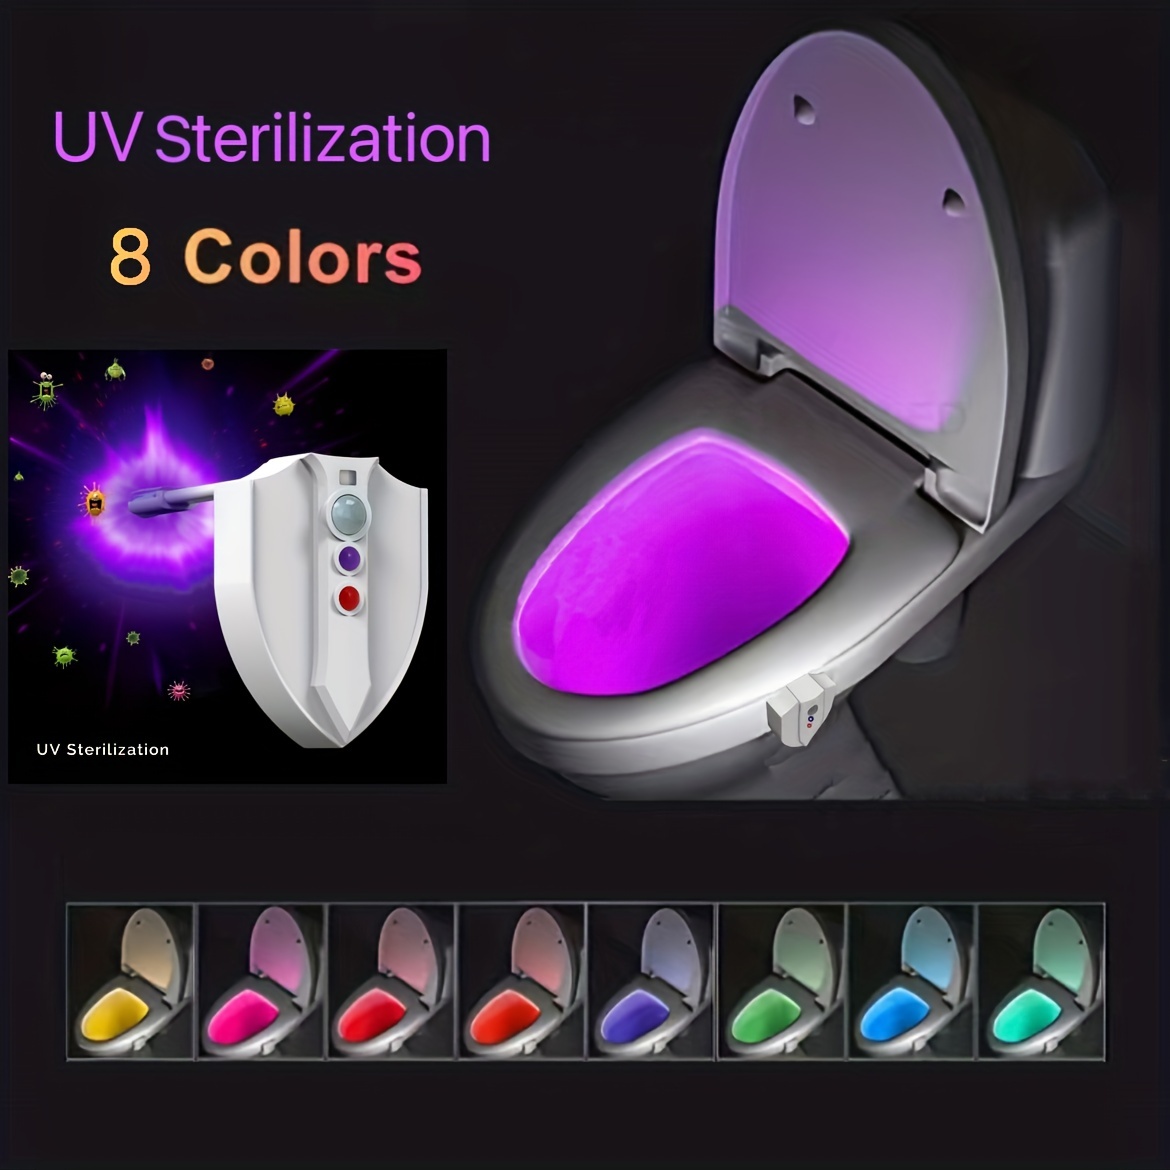 Motion Activated Disco Toilet Bowl Light